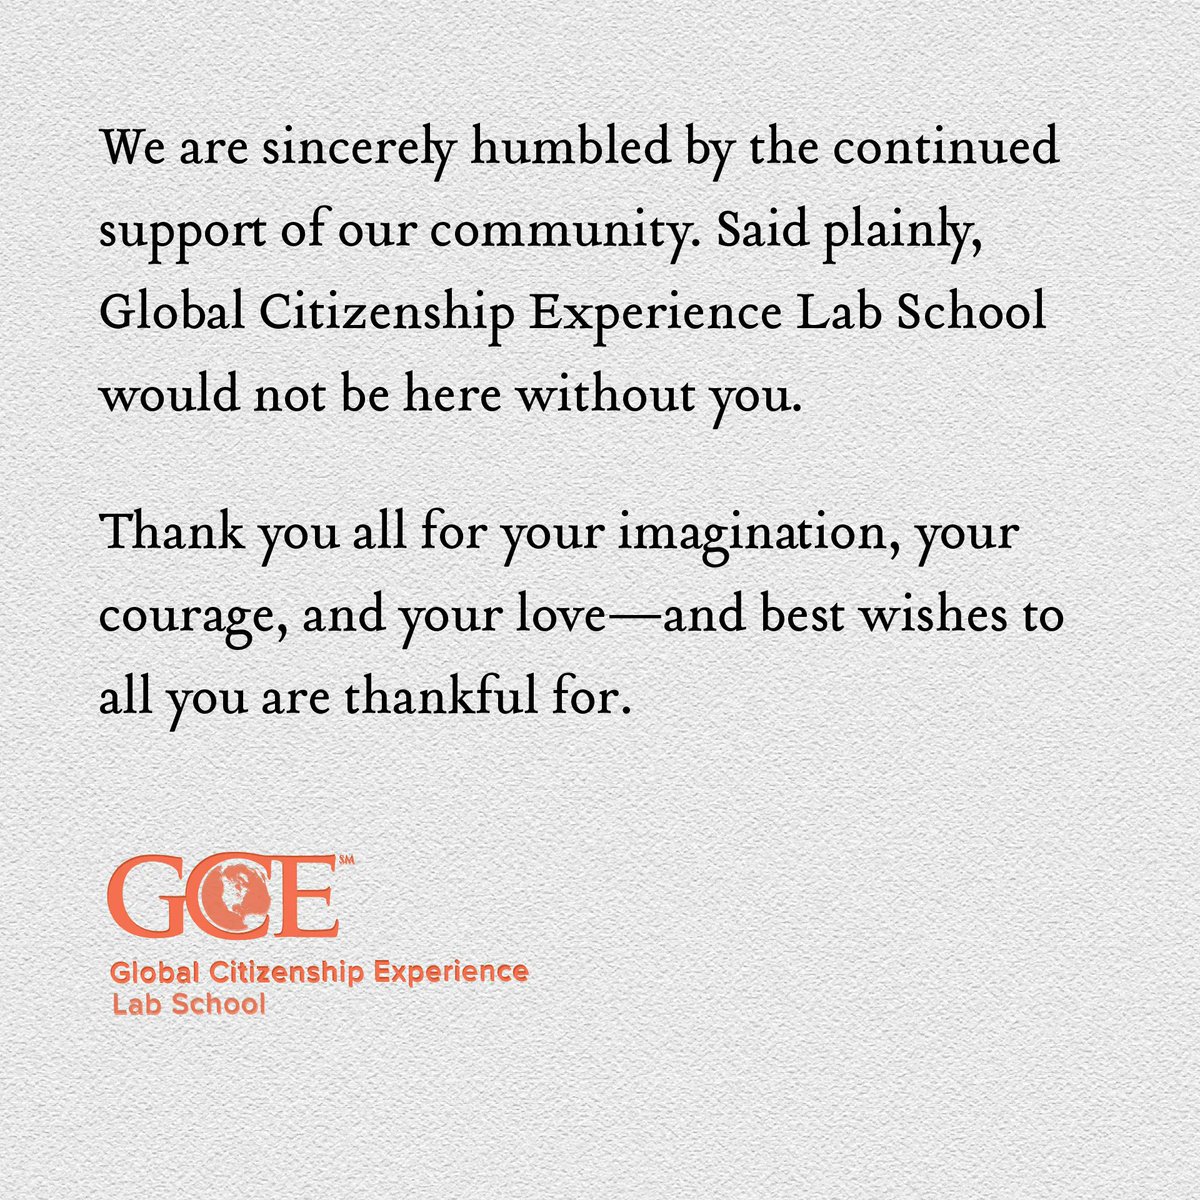 We are sincerely humbled by the continued support of our community. Said plainly, Global Citizenship Experience Lab School would not be here without you. Thank you all for your imagination, your courage, and your love—and best wishes to all you are thankful for. #gratitude